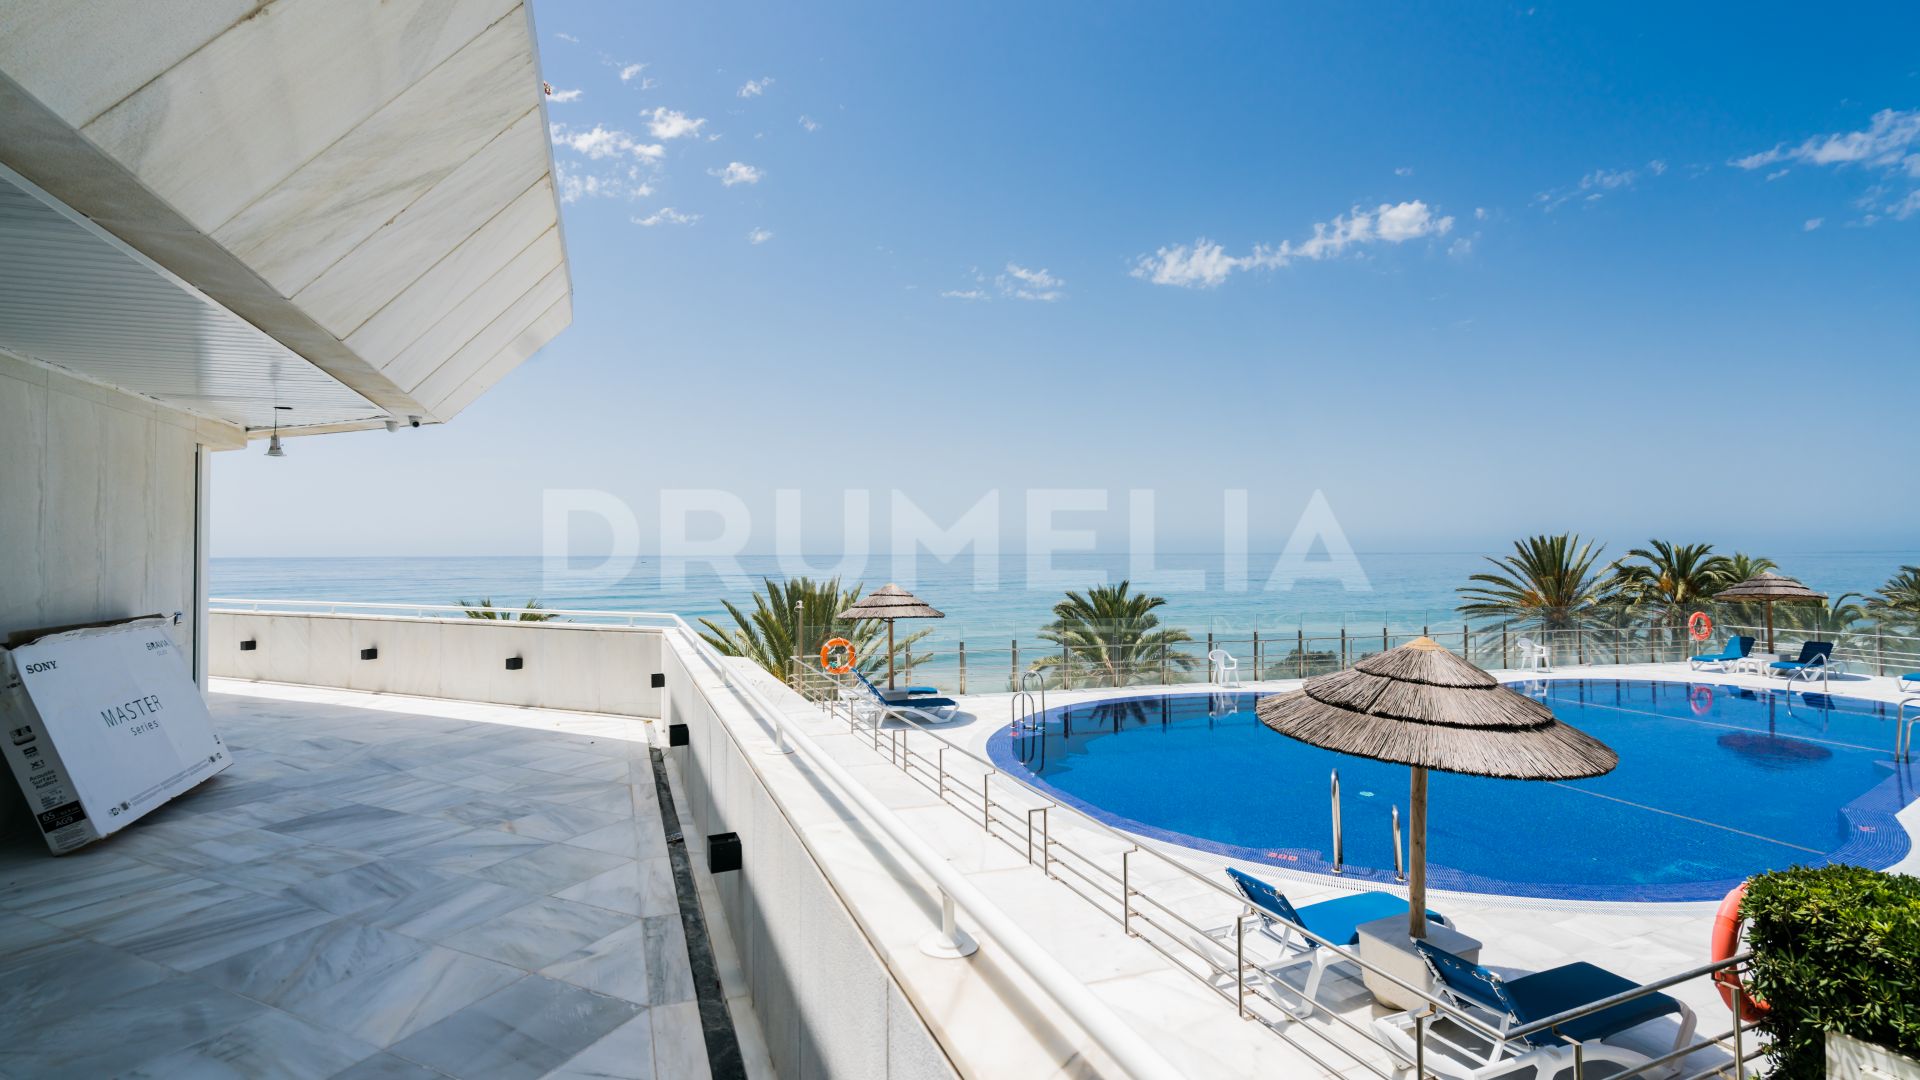 Stylish Renovated Frontline Beach Modern Apartment Overlooking Africa, Marbella